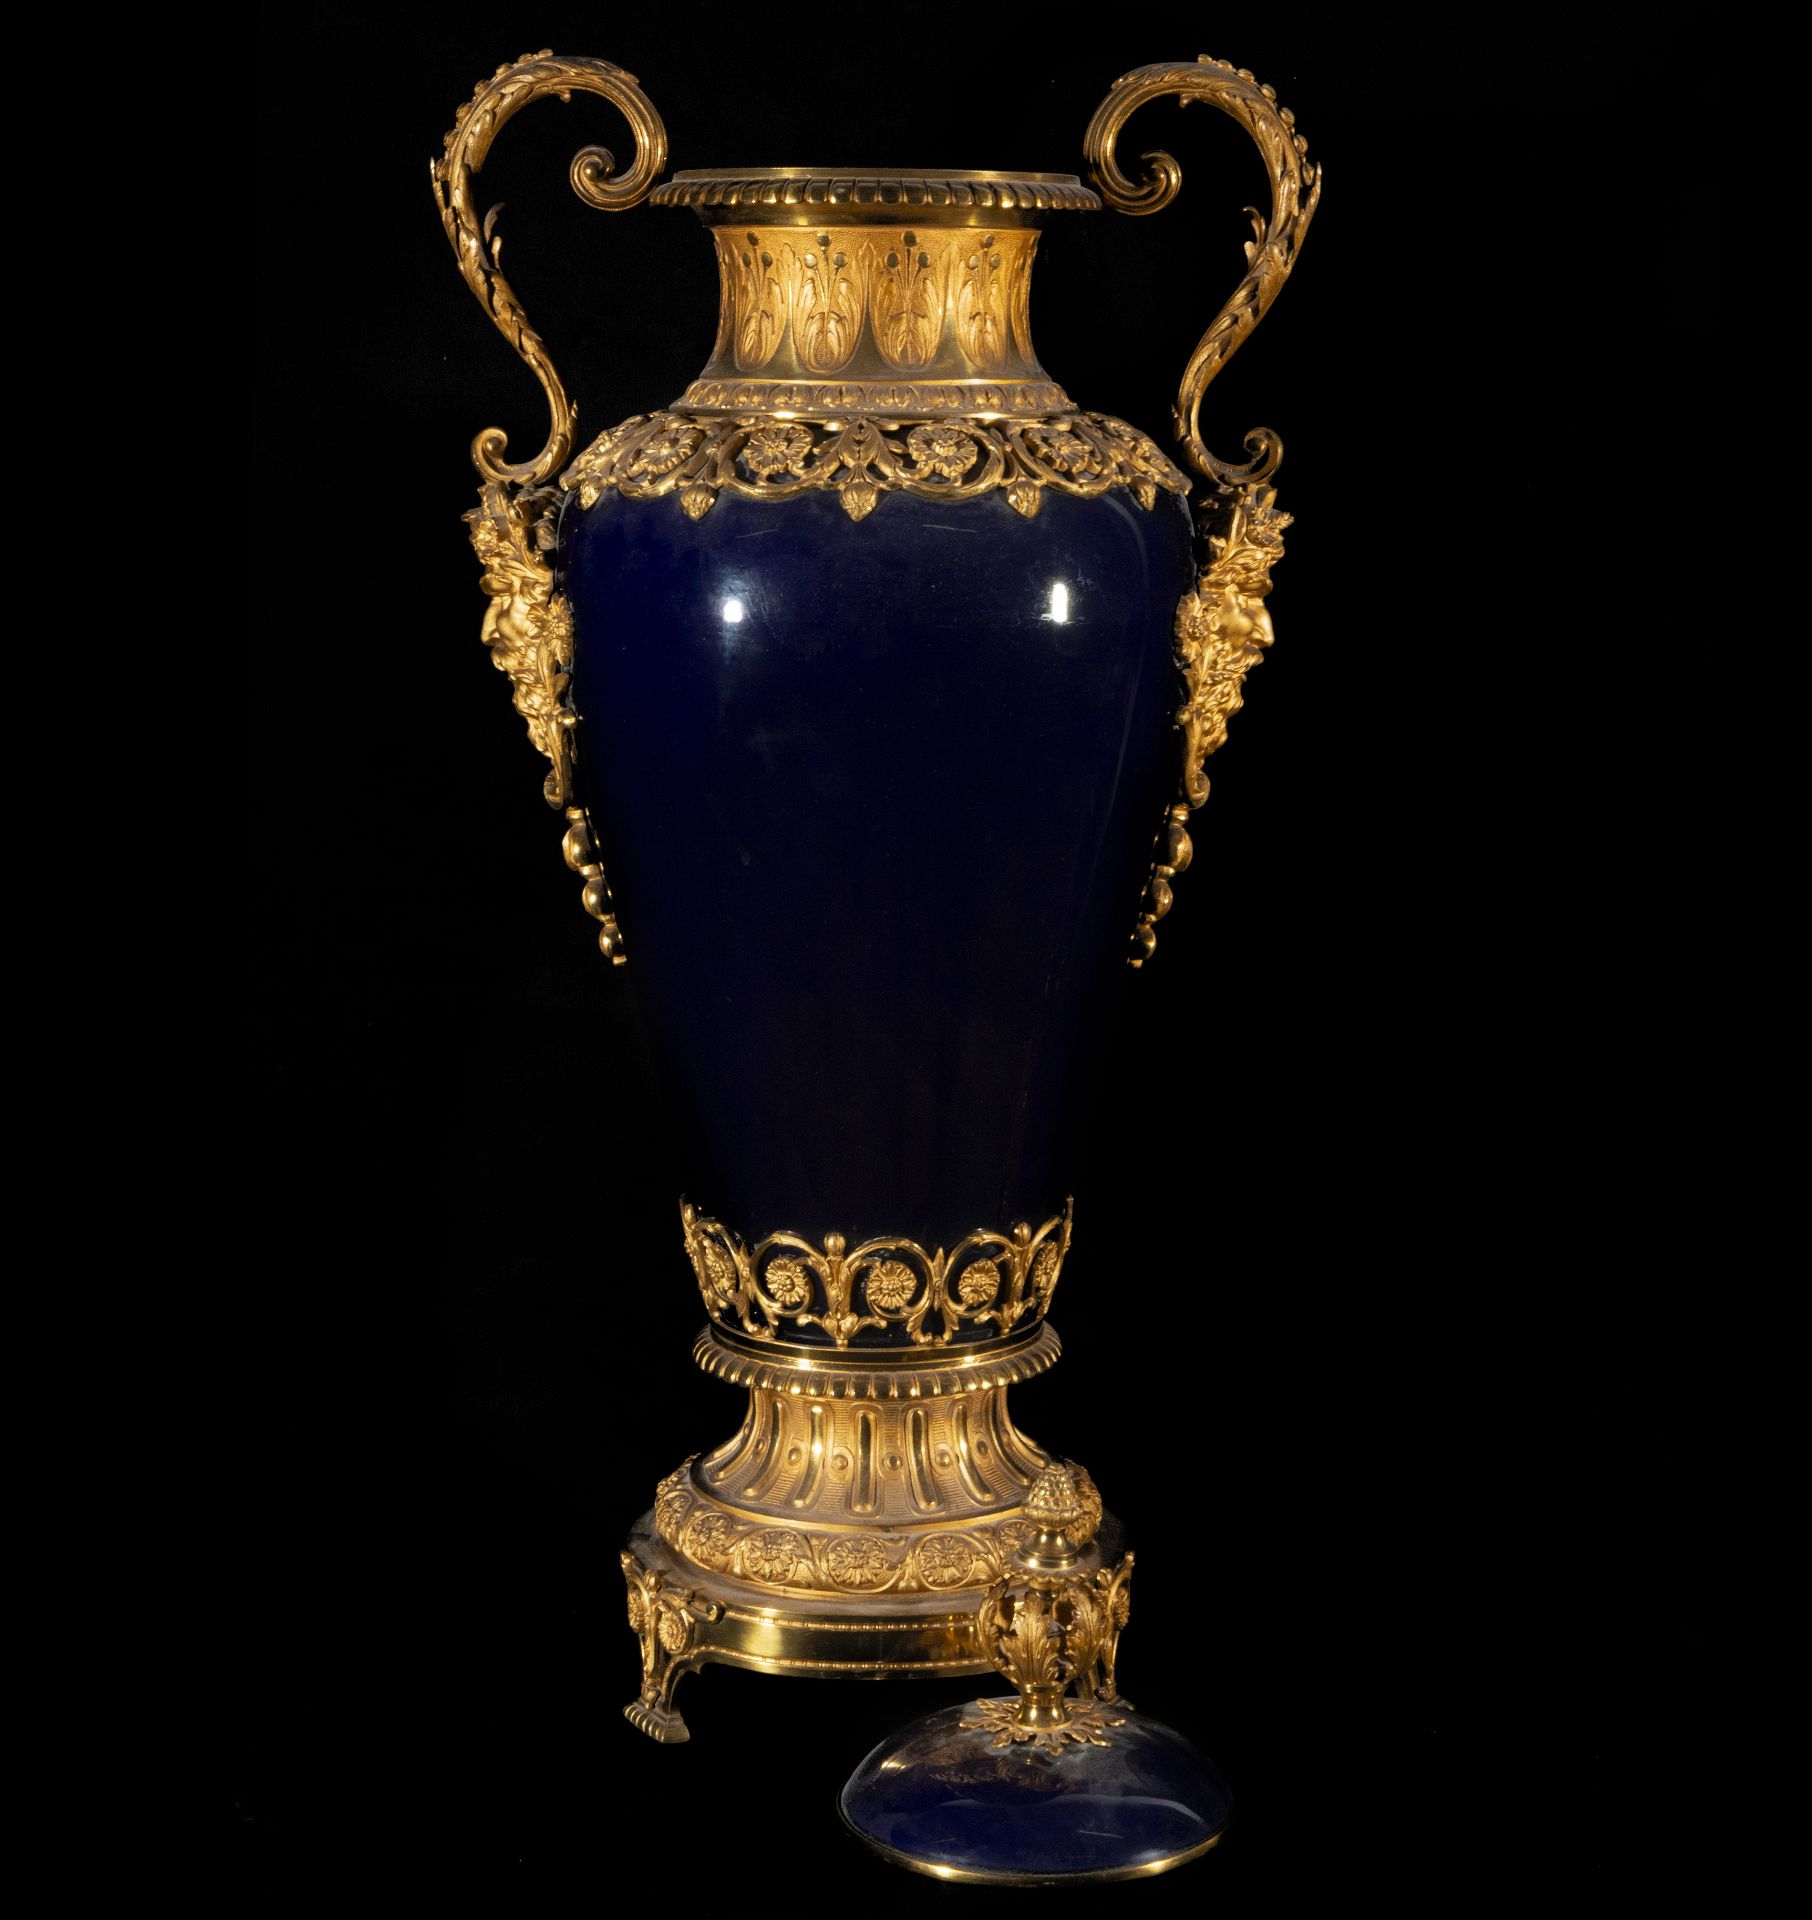 Pair of Large Sevres Vases in "Bleu Celeste" porcelain from the 19th century - Image 3 of 9